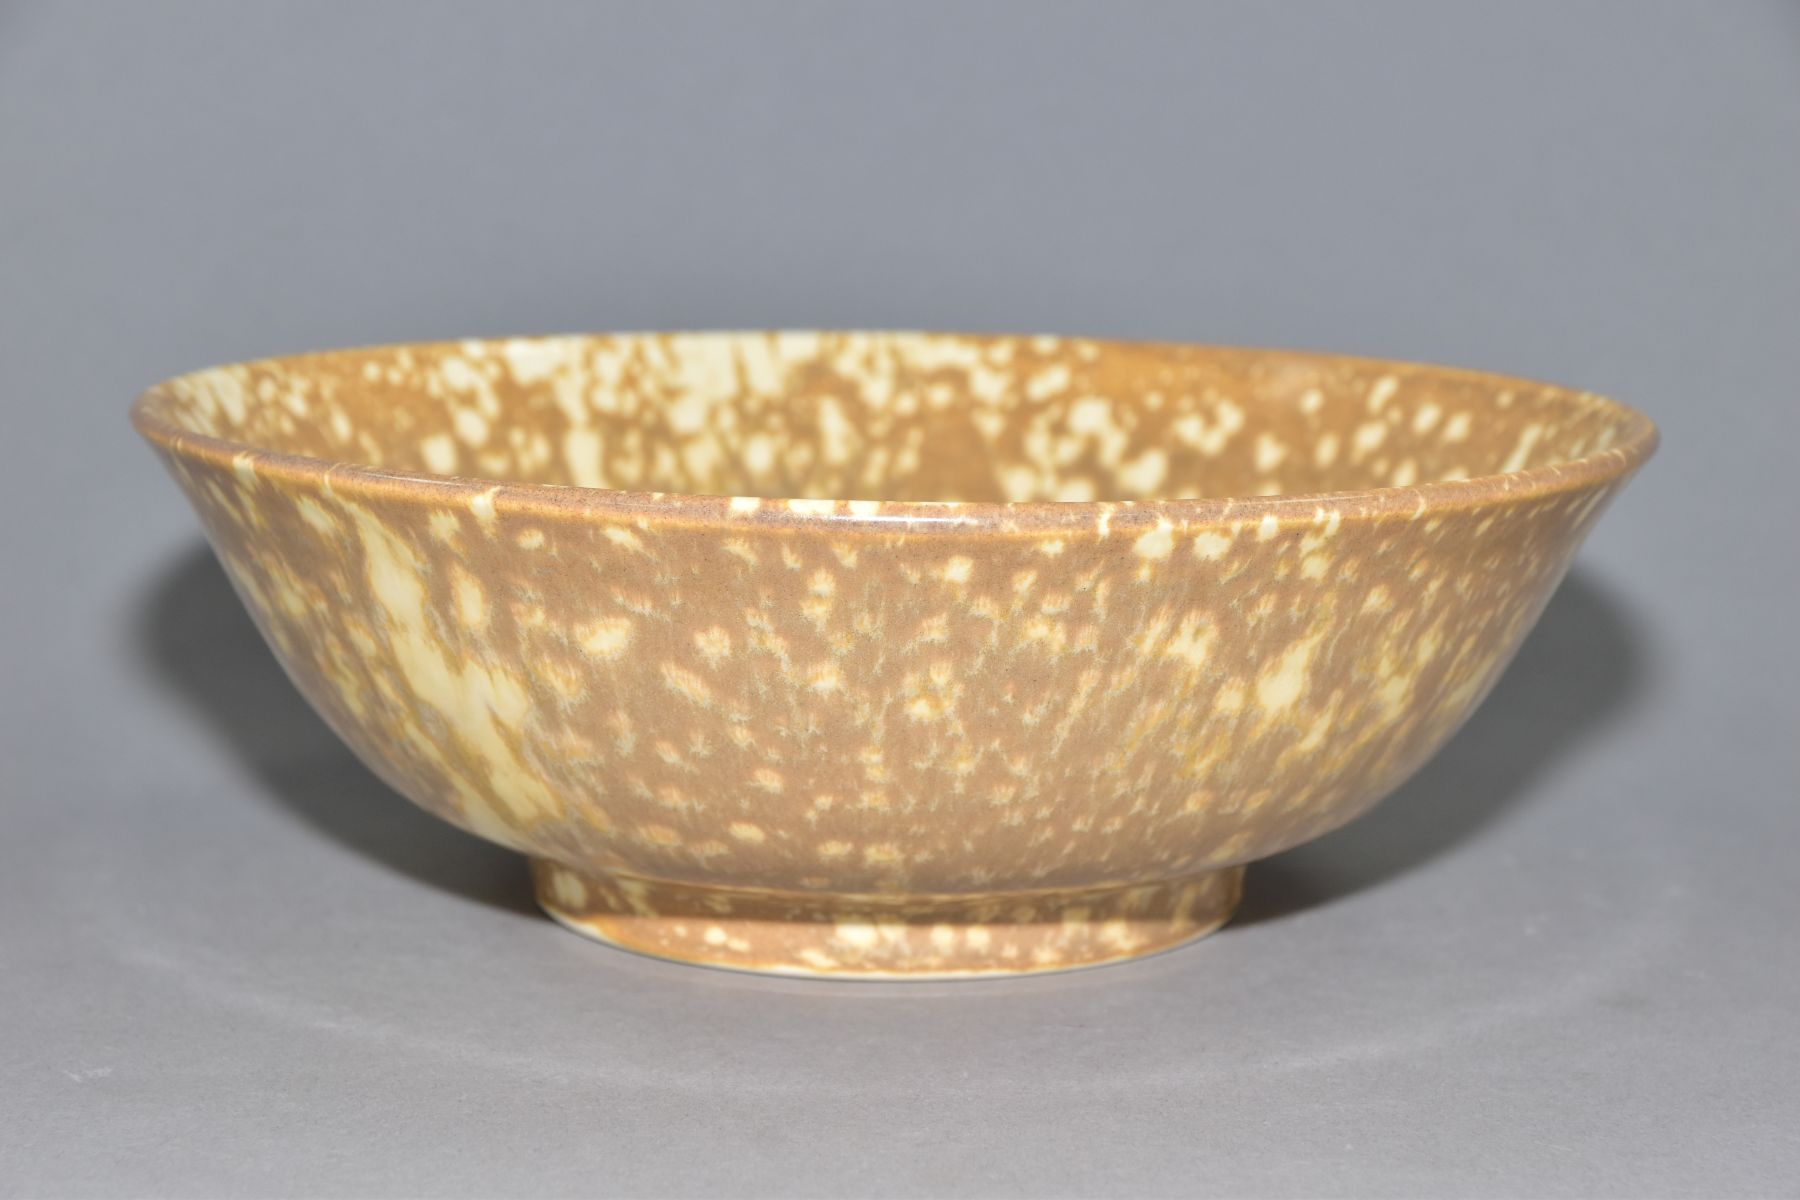 RUSKIN POTTERY, a brown and cream mottled glaze bowl, impressed Ruskin England to the base, height